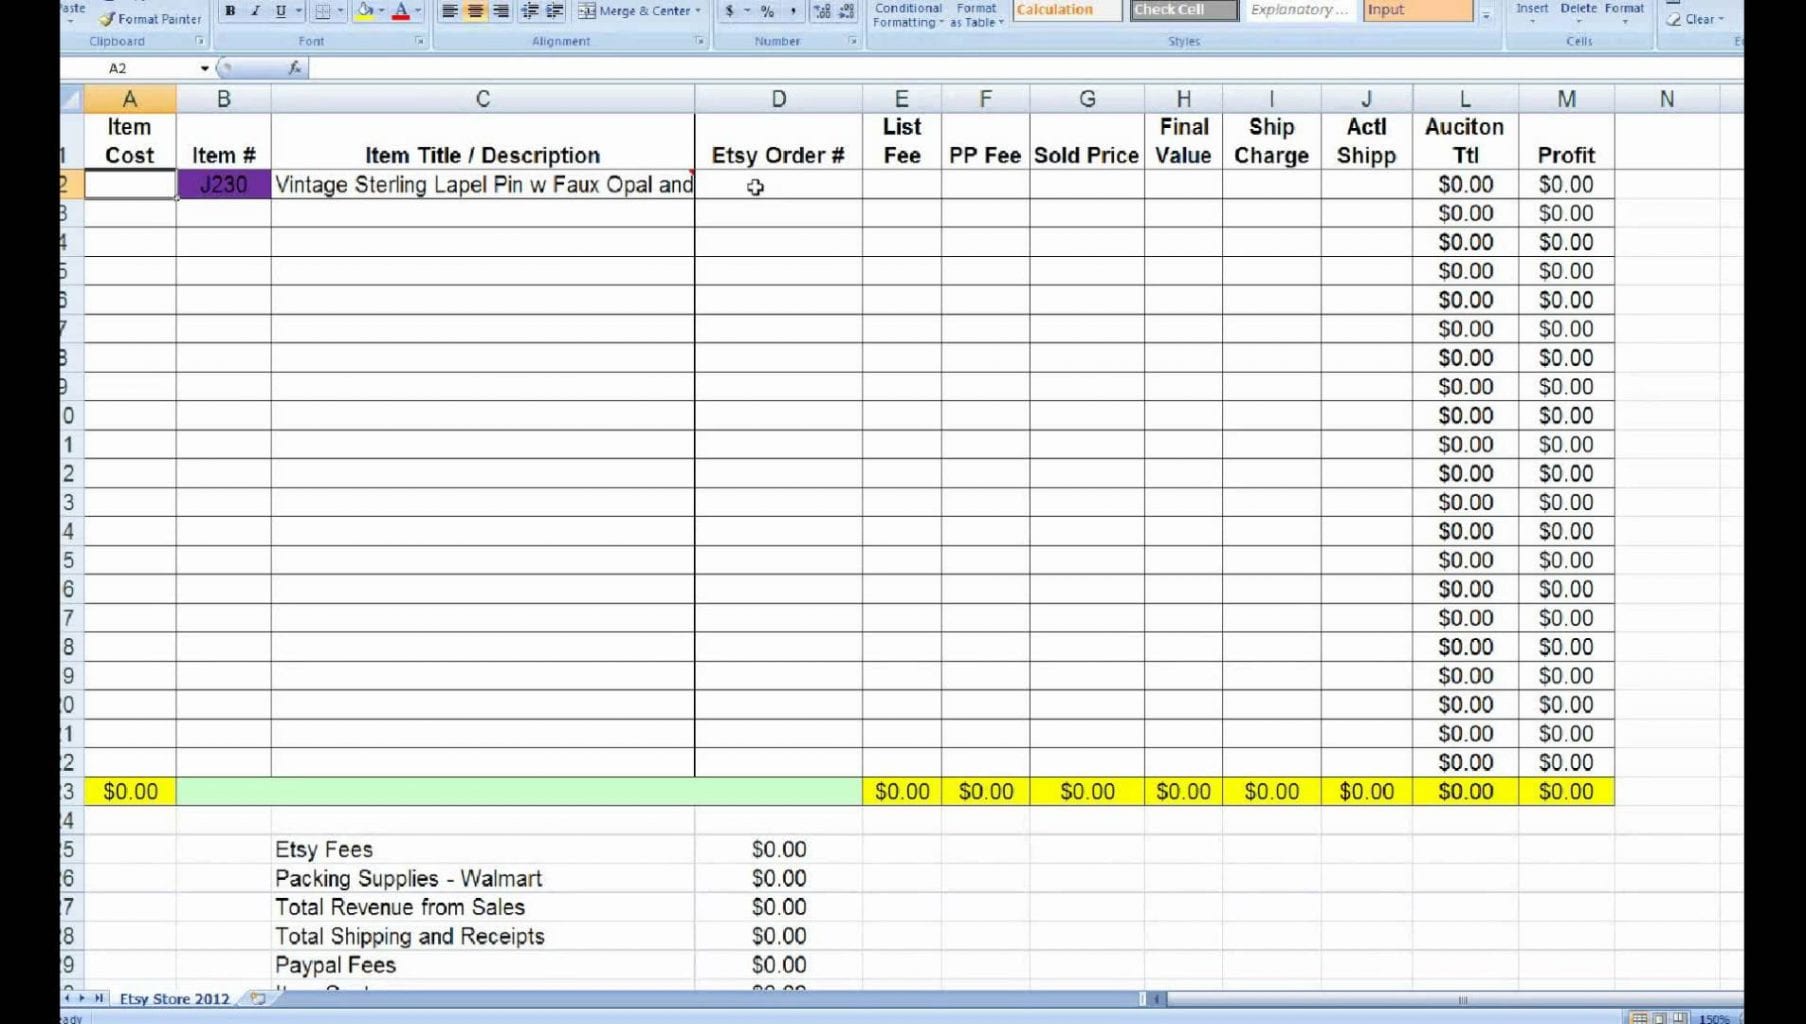 Free Excel Profit Loss Template 1